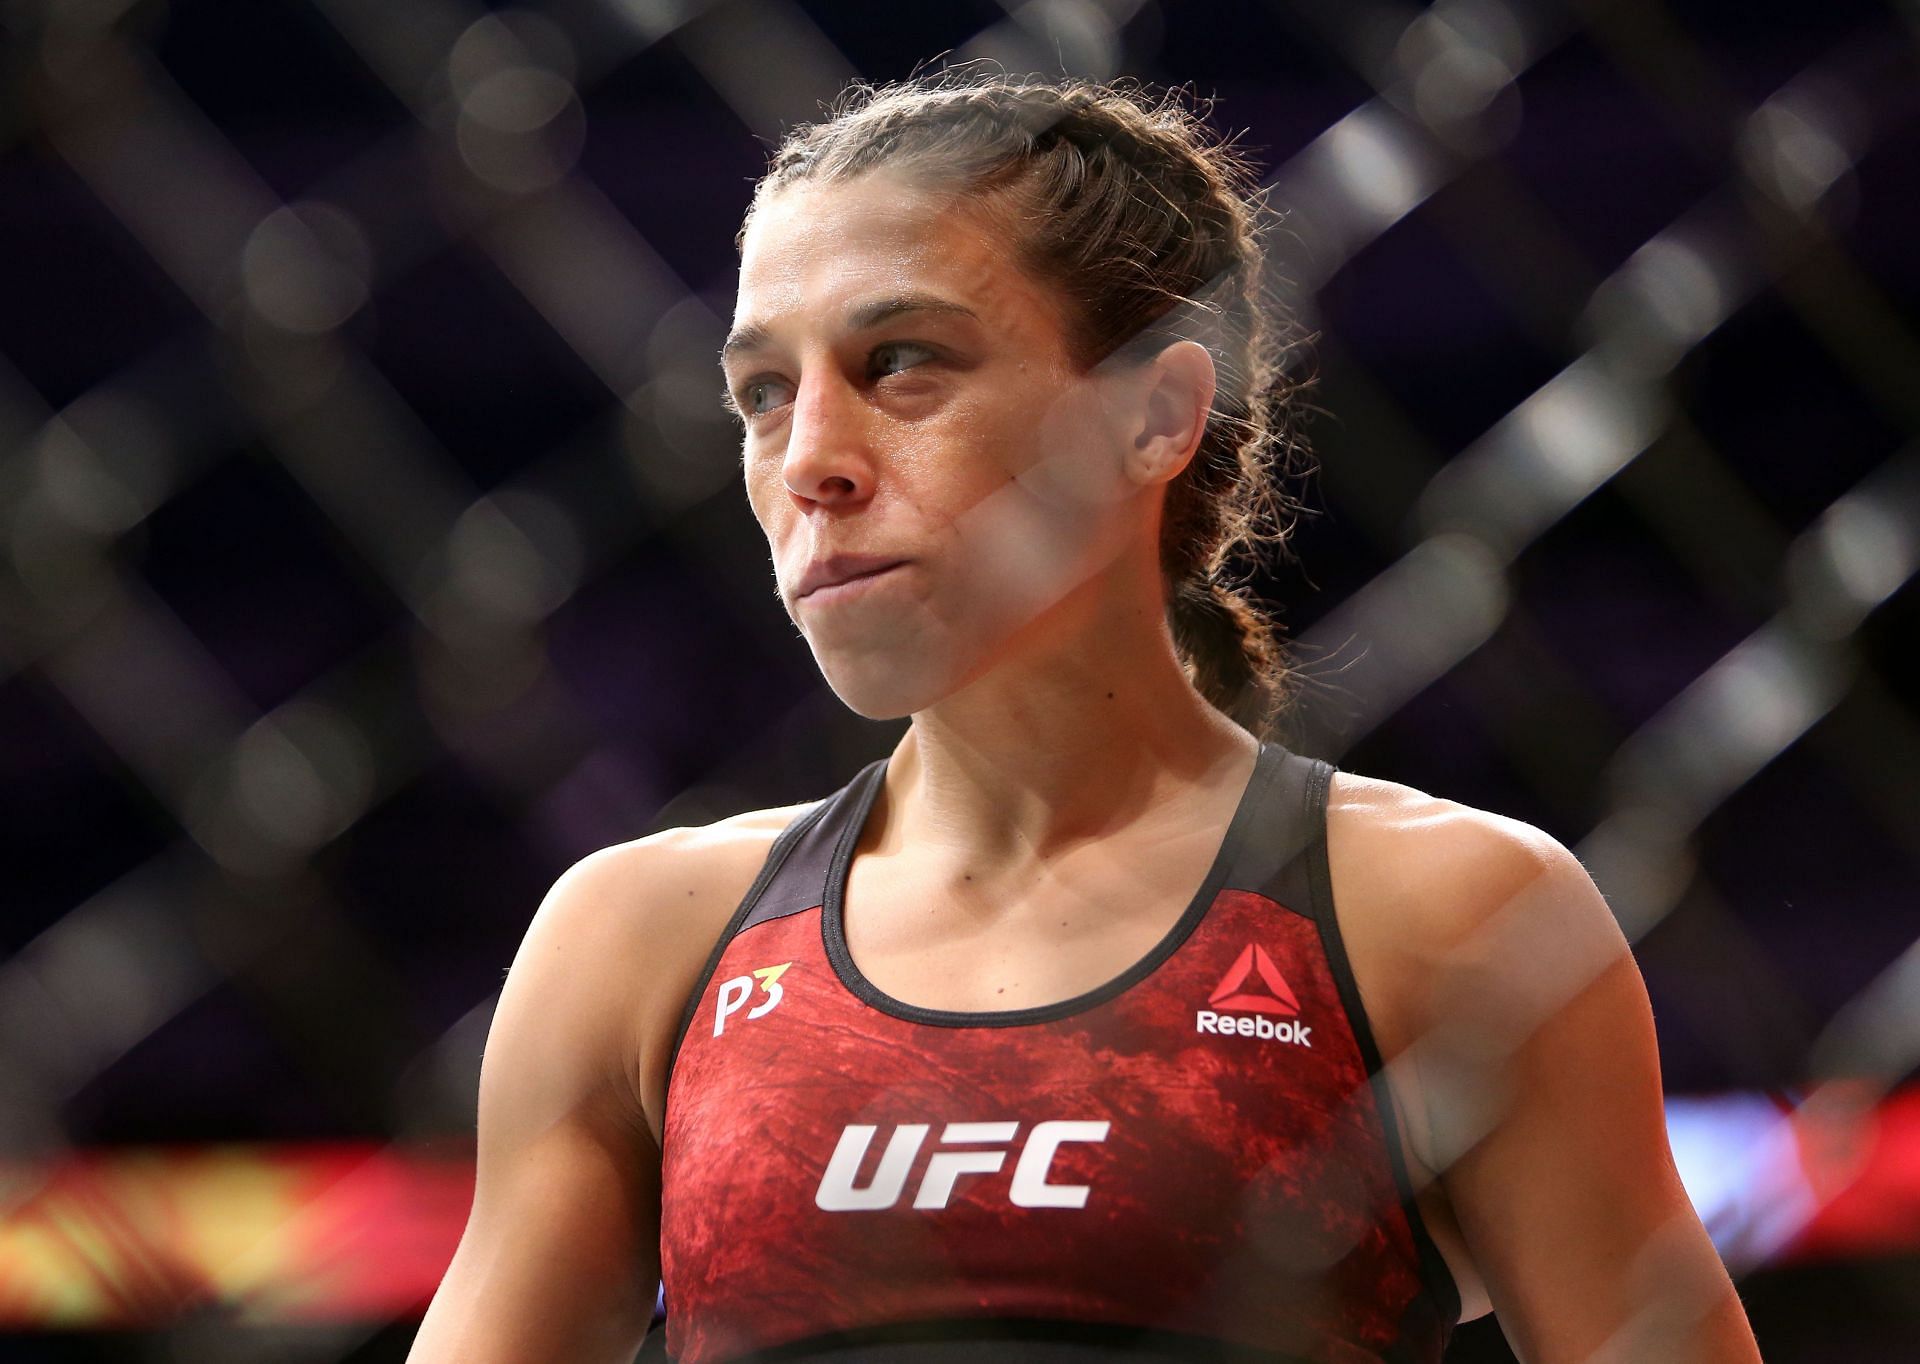 Jedrzejczyk is not currently ranked in the UFC